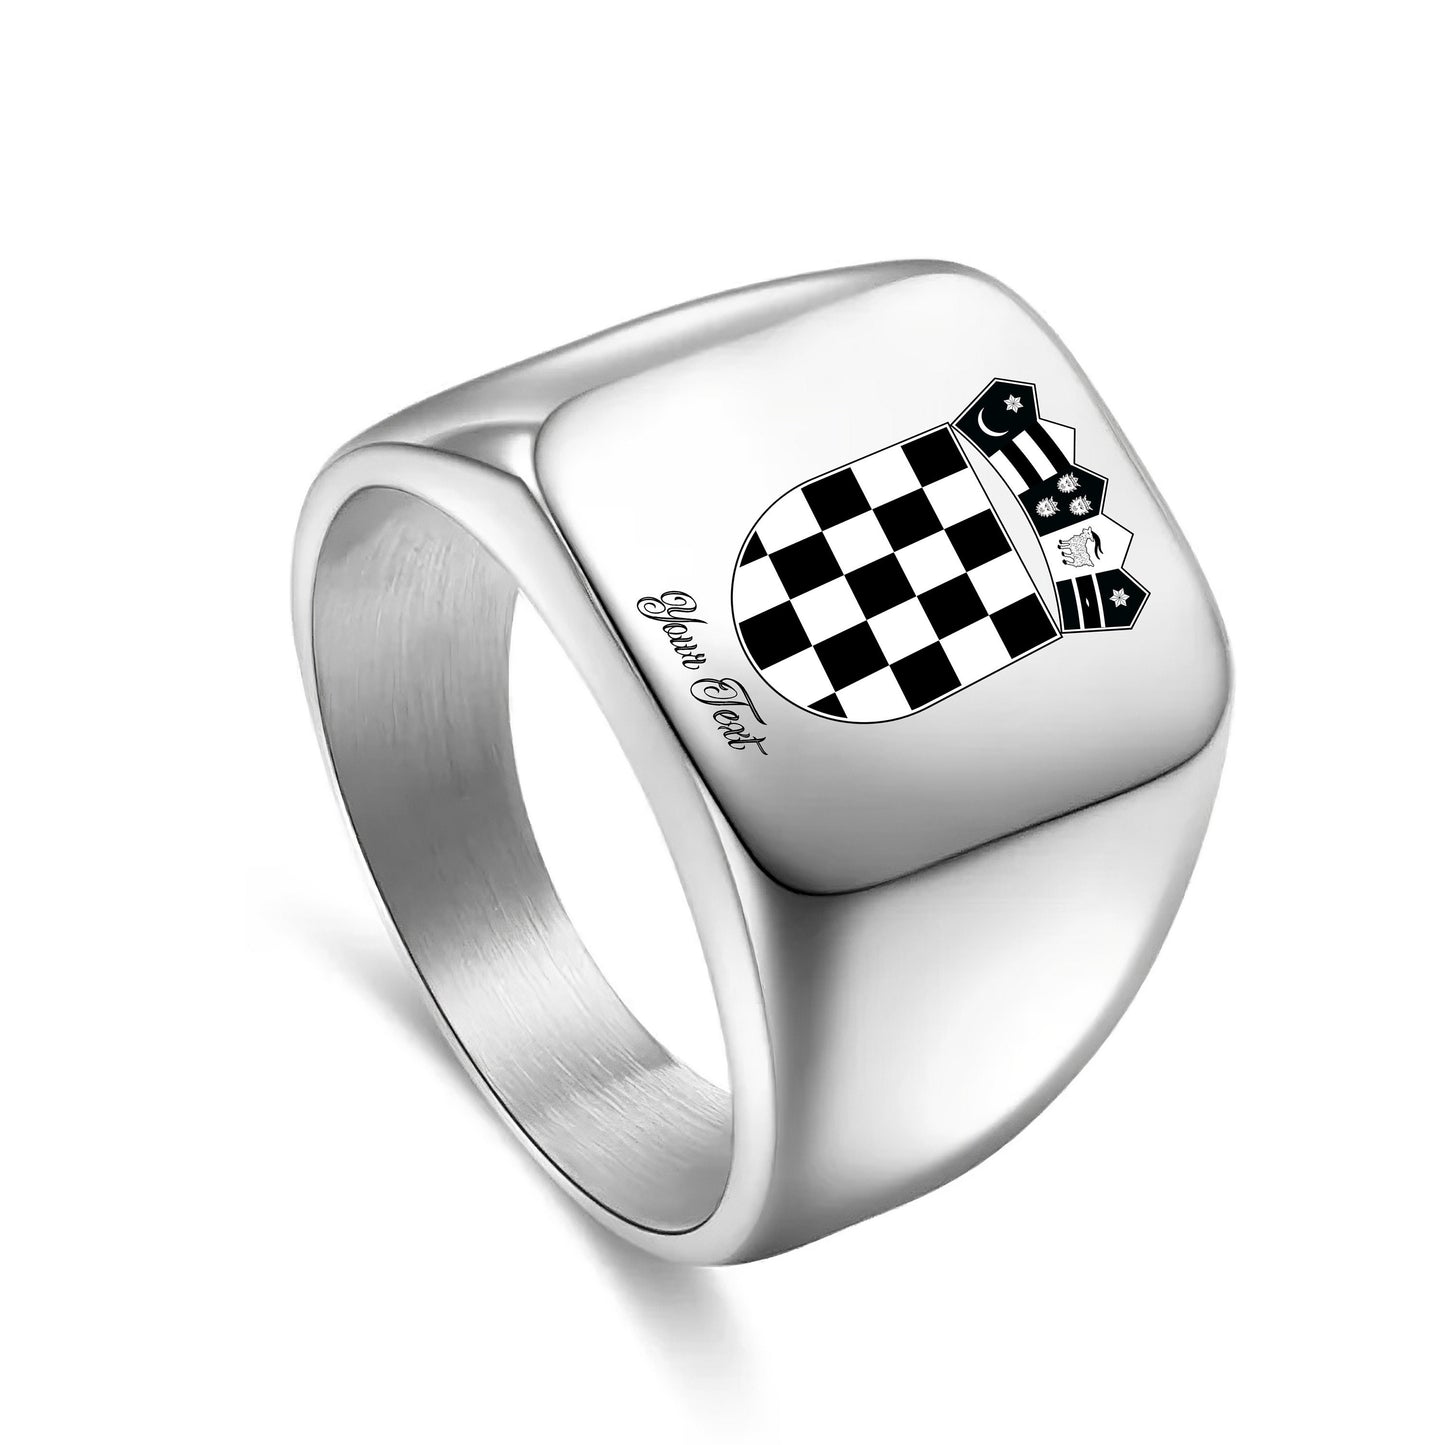 Croatia Emblem Ring, Stainless Steel Men Ring Silver Engraved Hrvatska, Your Name Ring, Gift for him Father brother boyfriend